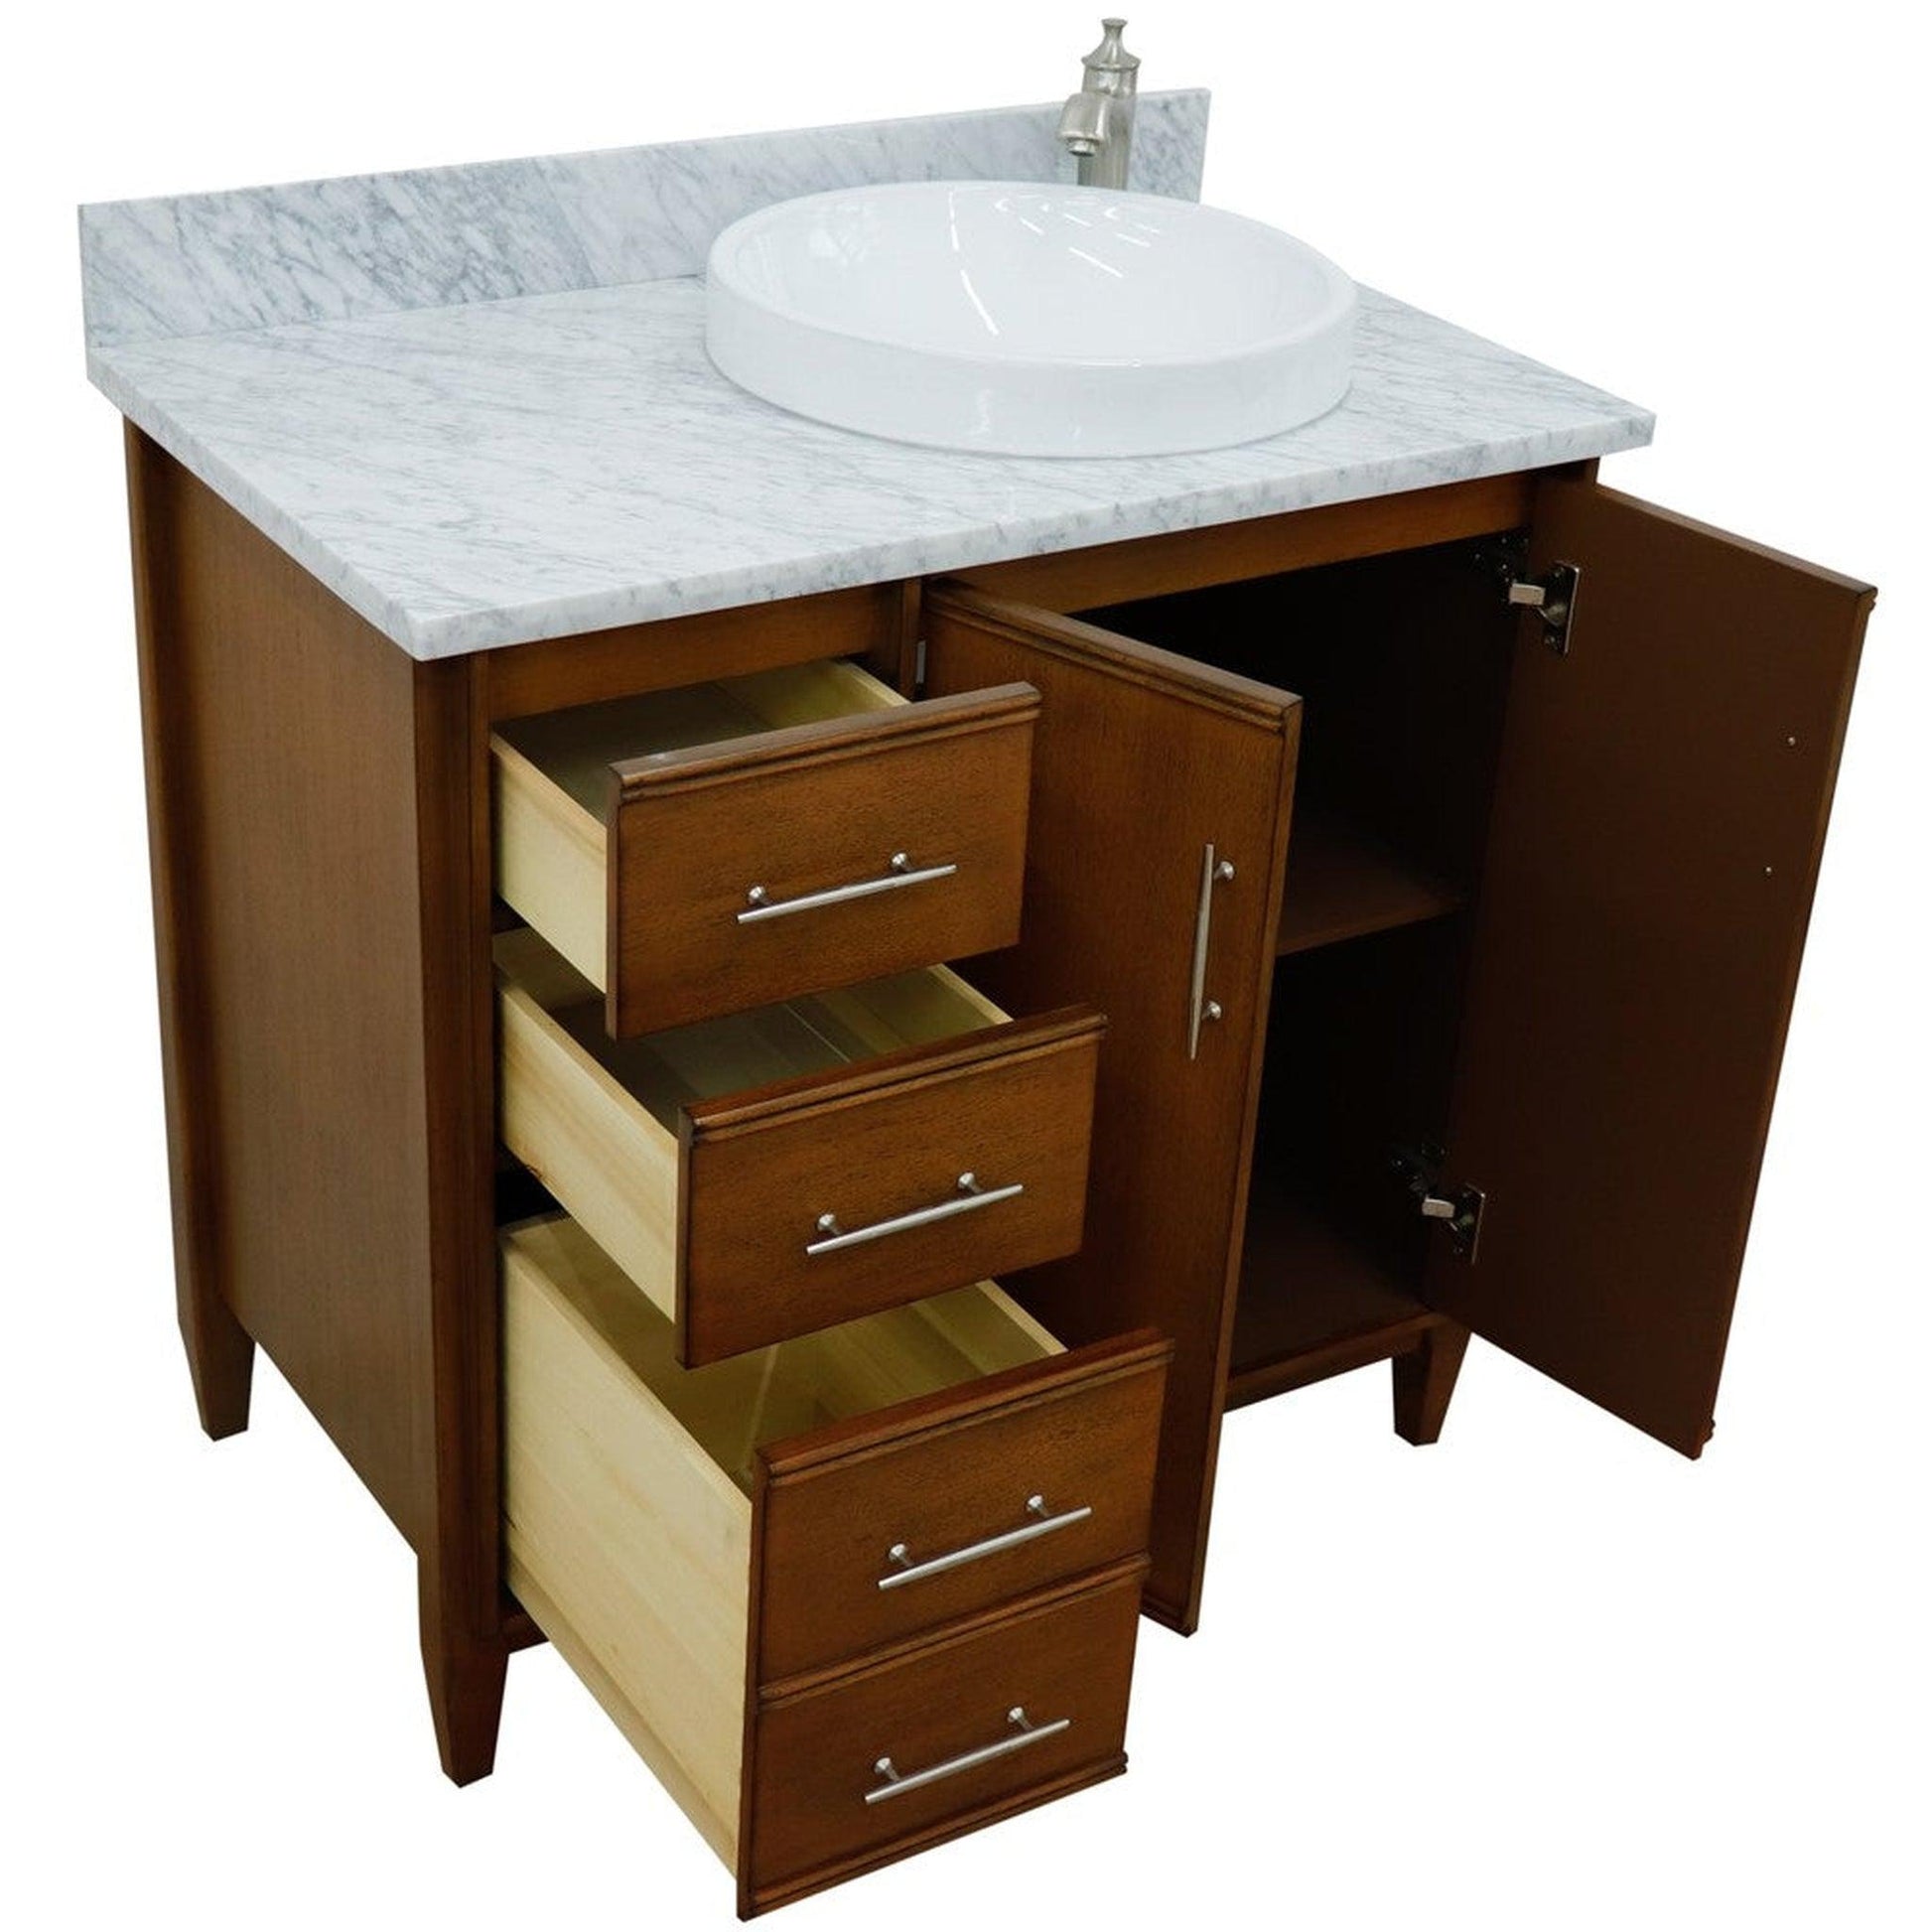 Bellaterra Home MCM 37" 2-Door 3-Drawer Walnut Freestanding Vanity Set With Ceramic Right Vessel Sink and White Carrara Marble Top, and Right Door Cabinet